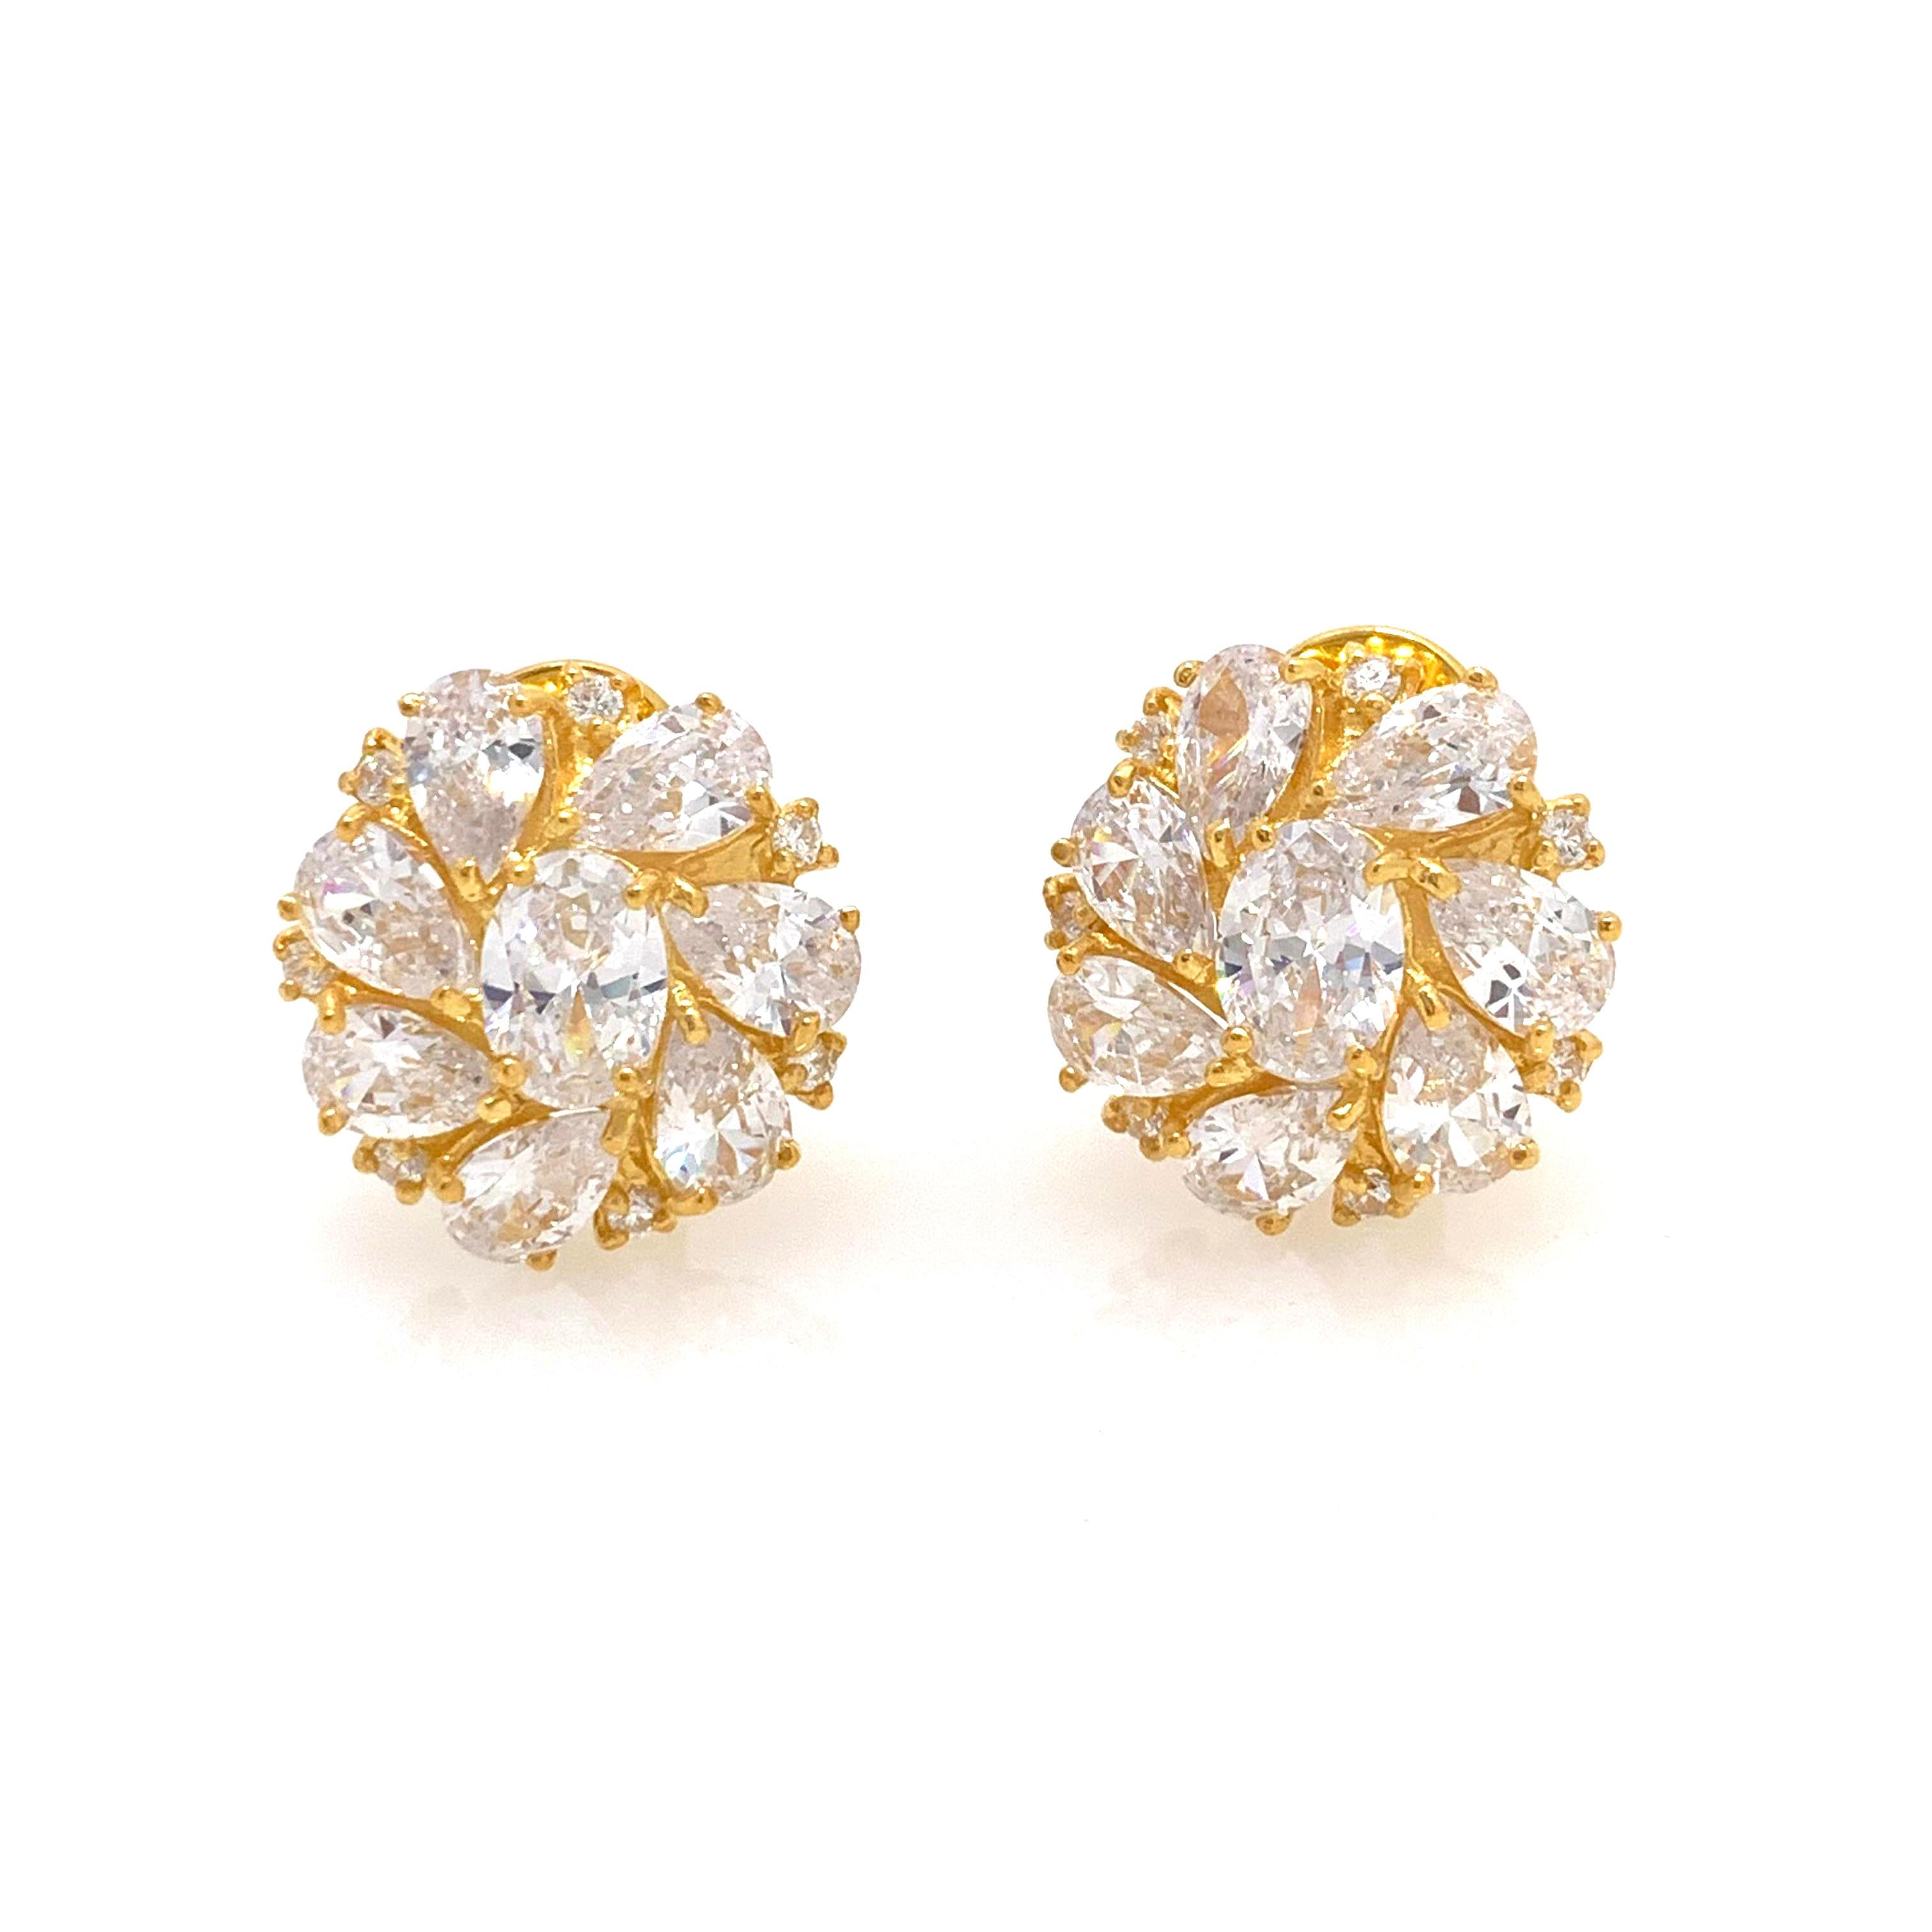 Stunning  Simulated Diamond Cluster Vermeil Earrings. 

These estate-style earrings feature 30 pieces of beautiful AAA quality simulated diamond cz in various shape, handset in 18k gold vermeil over sterling silver.  Straight post with omega clip